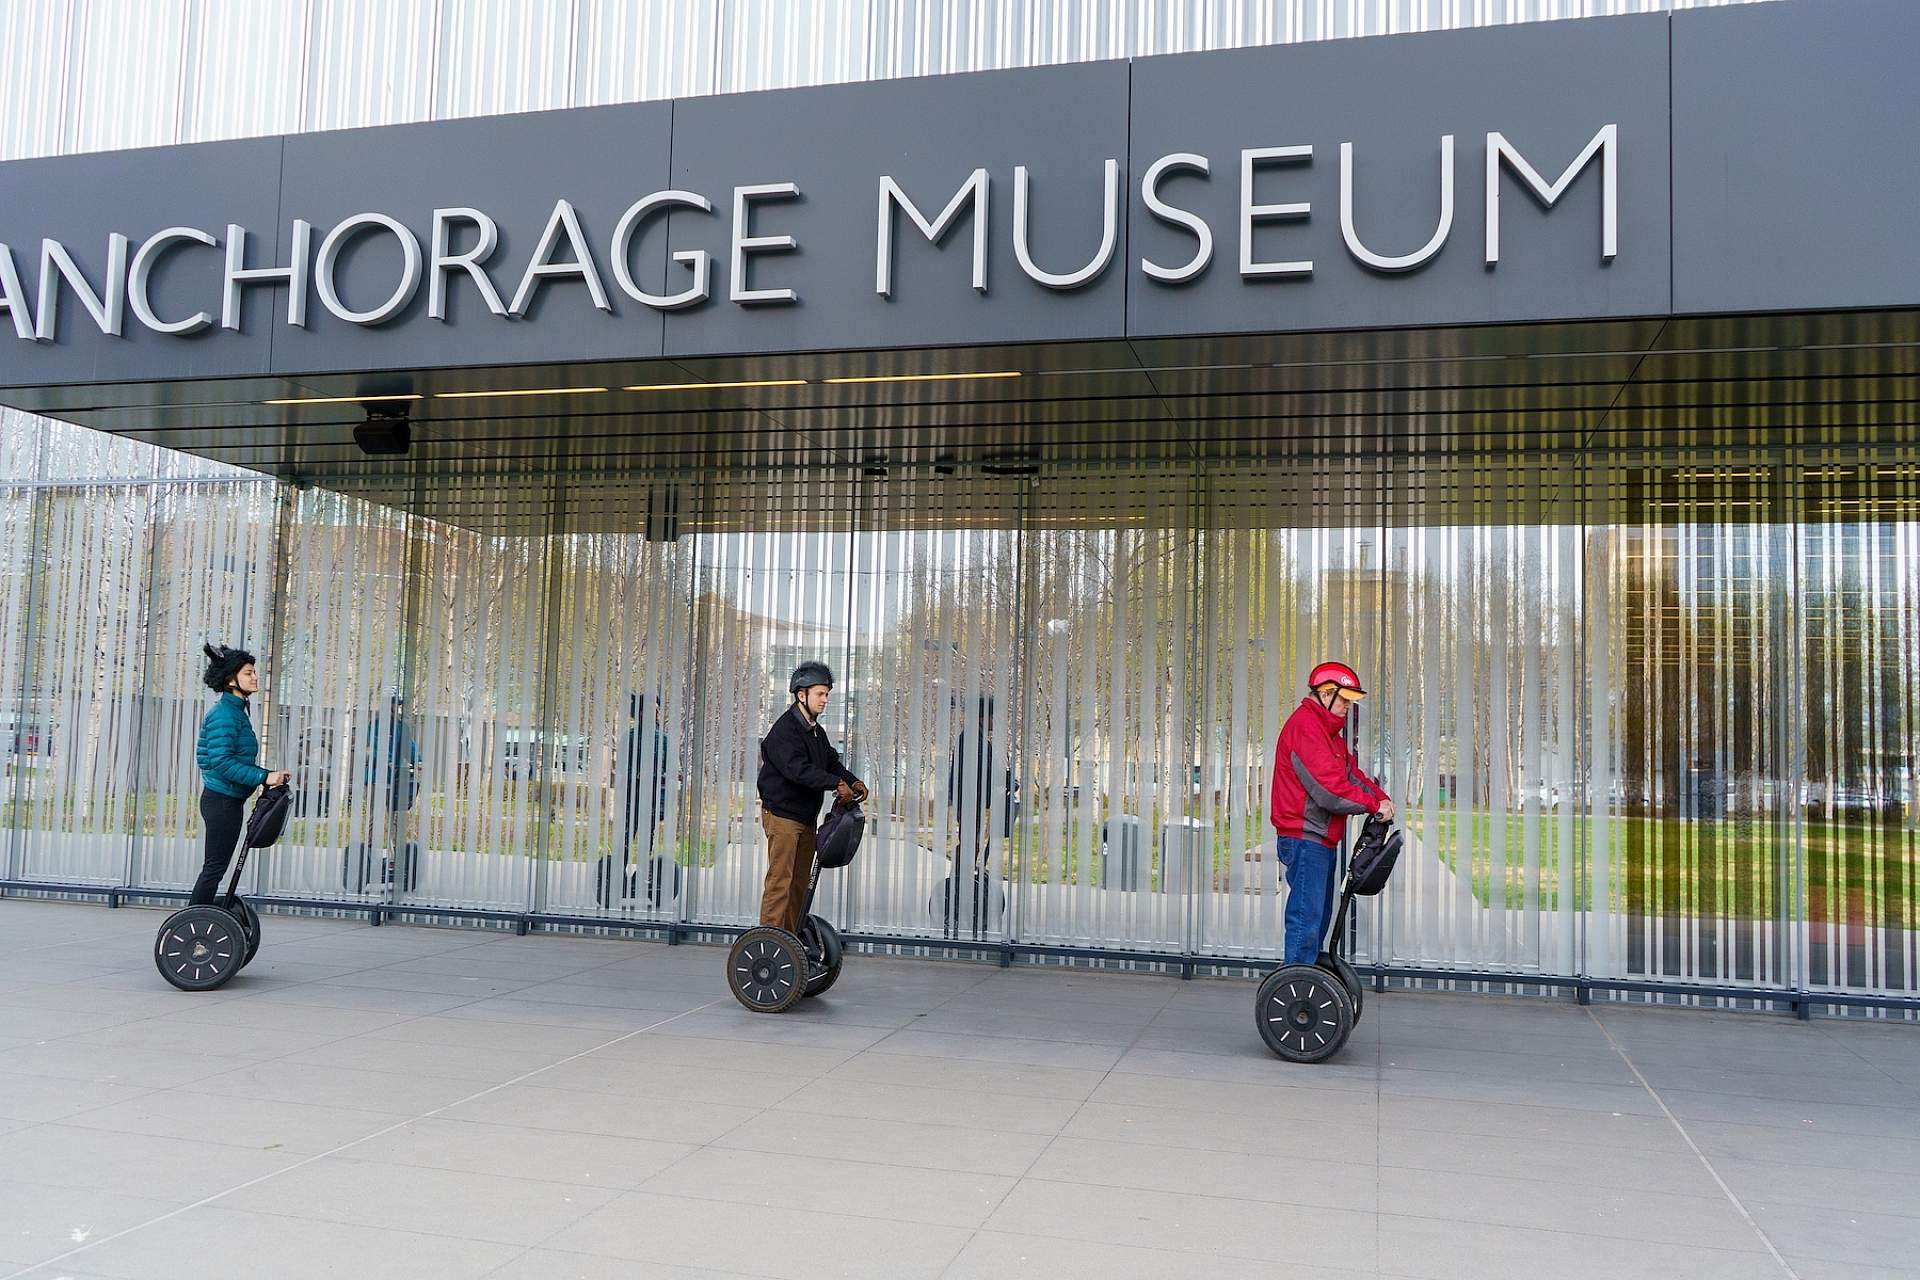 A tour group of Segways rides past the Anchorage Museum in Anchorage, Alaska.